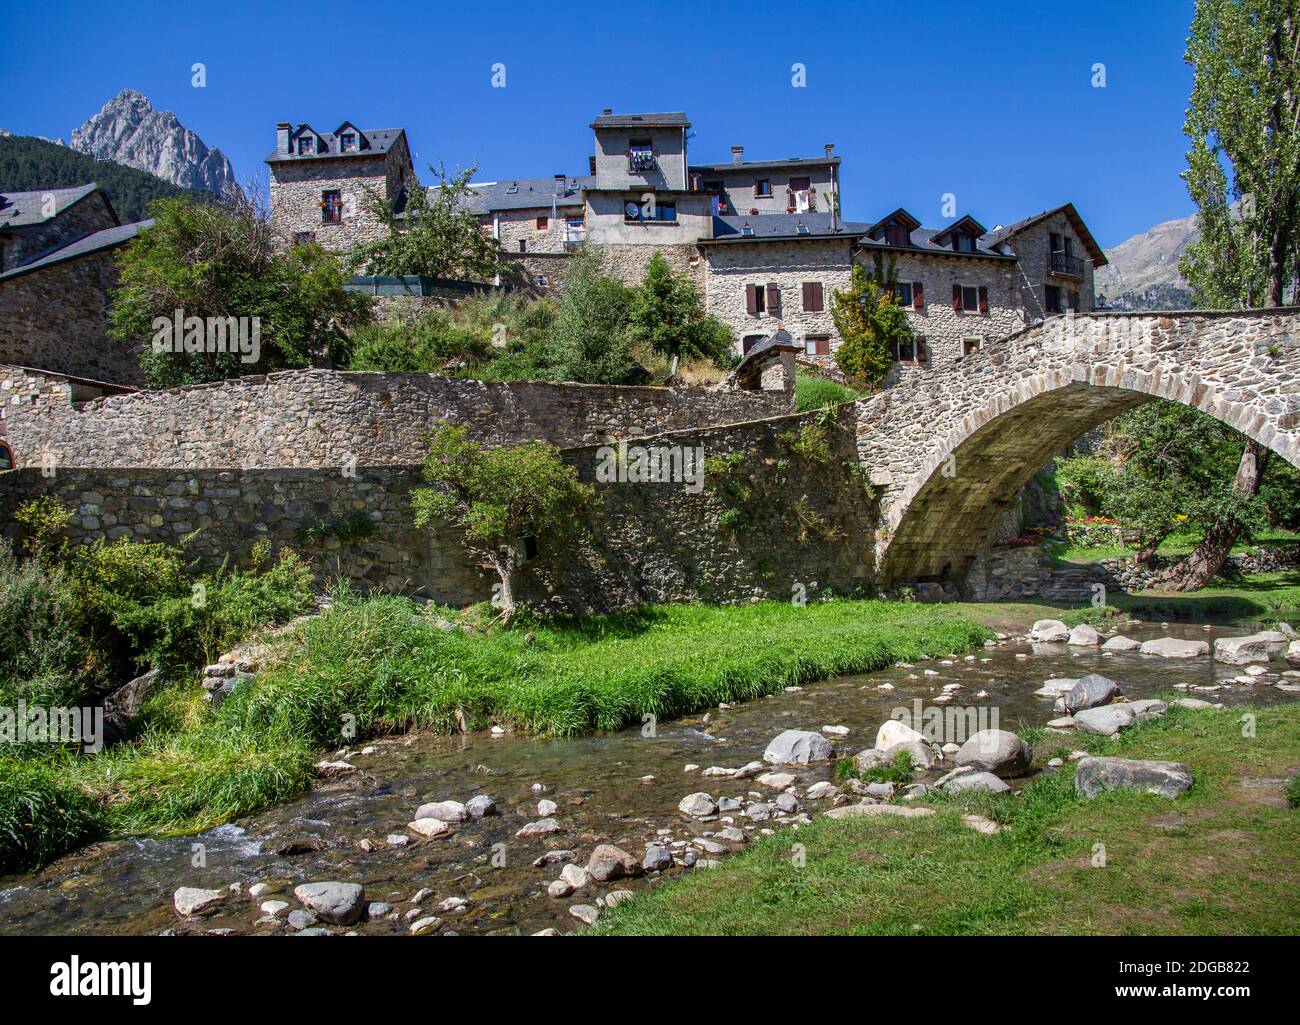 mountain village built in stone with a bridge over which a river flows on a sunny summer day, Sallent de Gallego, Huesca, Pyrenees Spain, horizontal Stock Photo